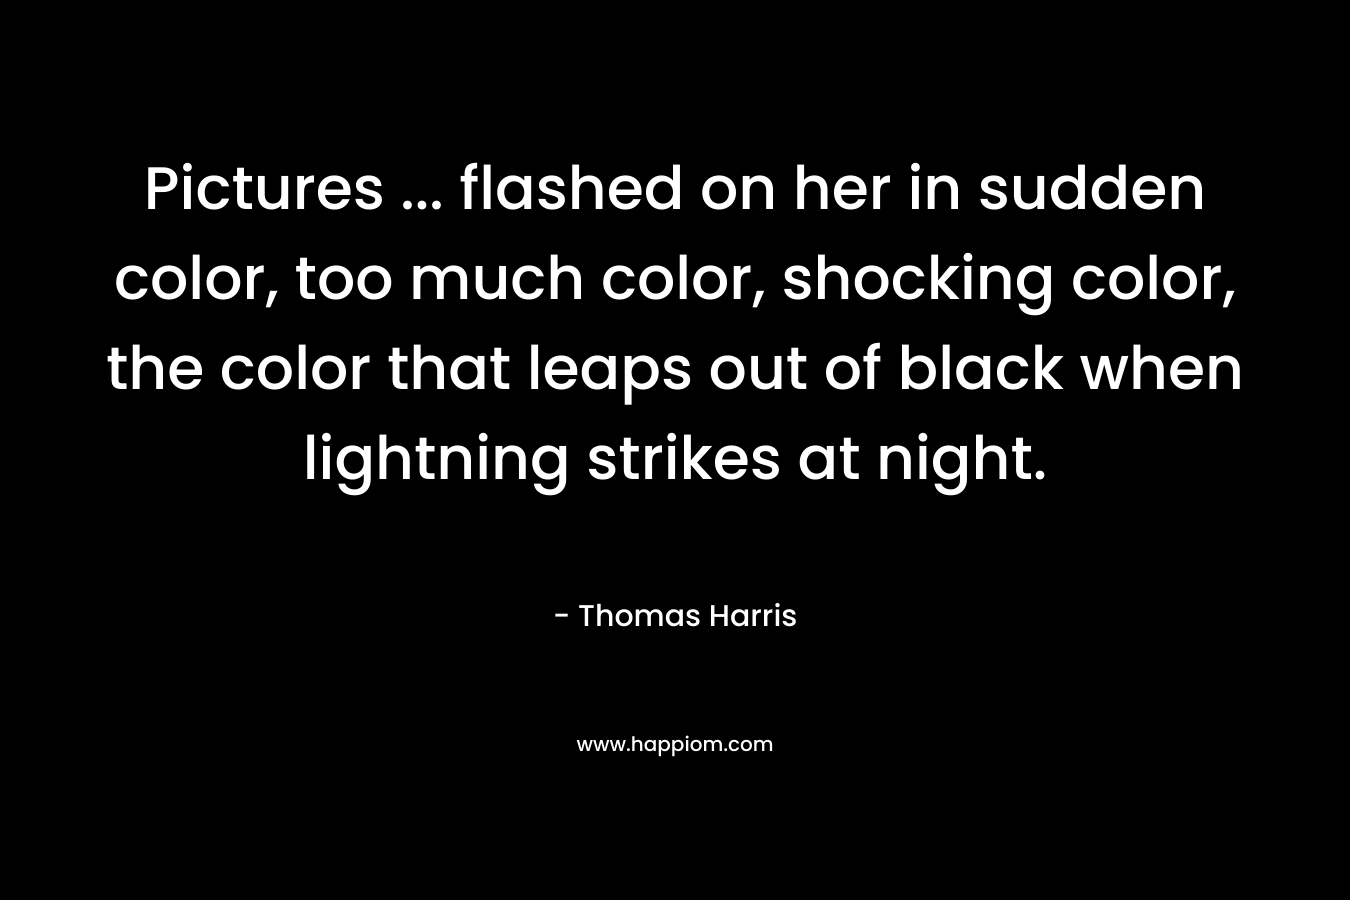 Pictures … flashed on her in sudden color, too much color, shocking color, the color that leaps out of black when lightning strikes at night. – Thomas Harris